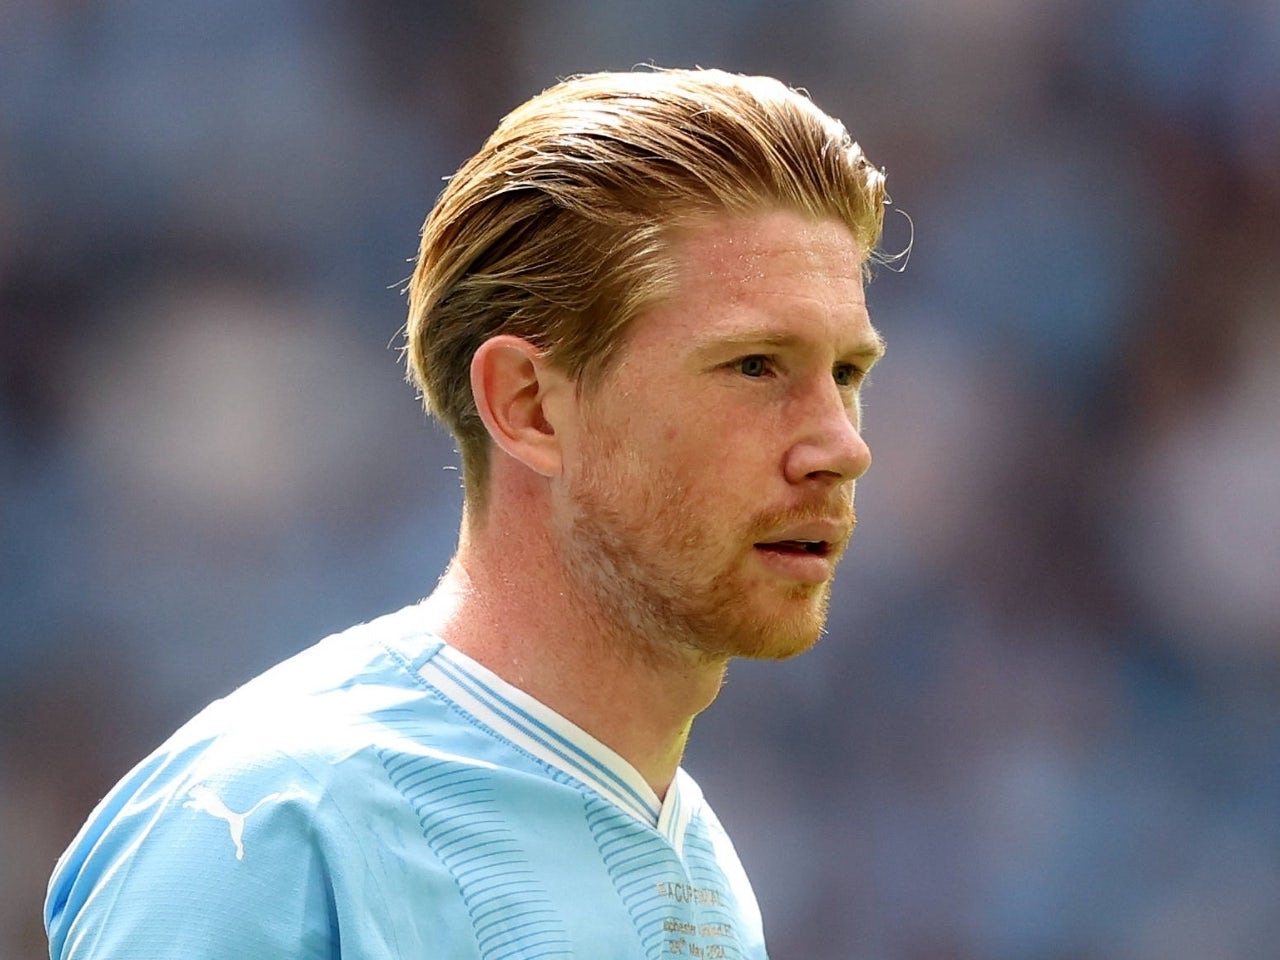 Kevin De Bruyne update: Pep Guardiola reveals whether Man City star will leave this summer